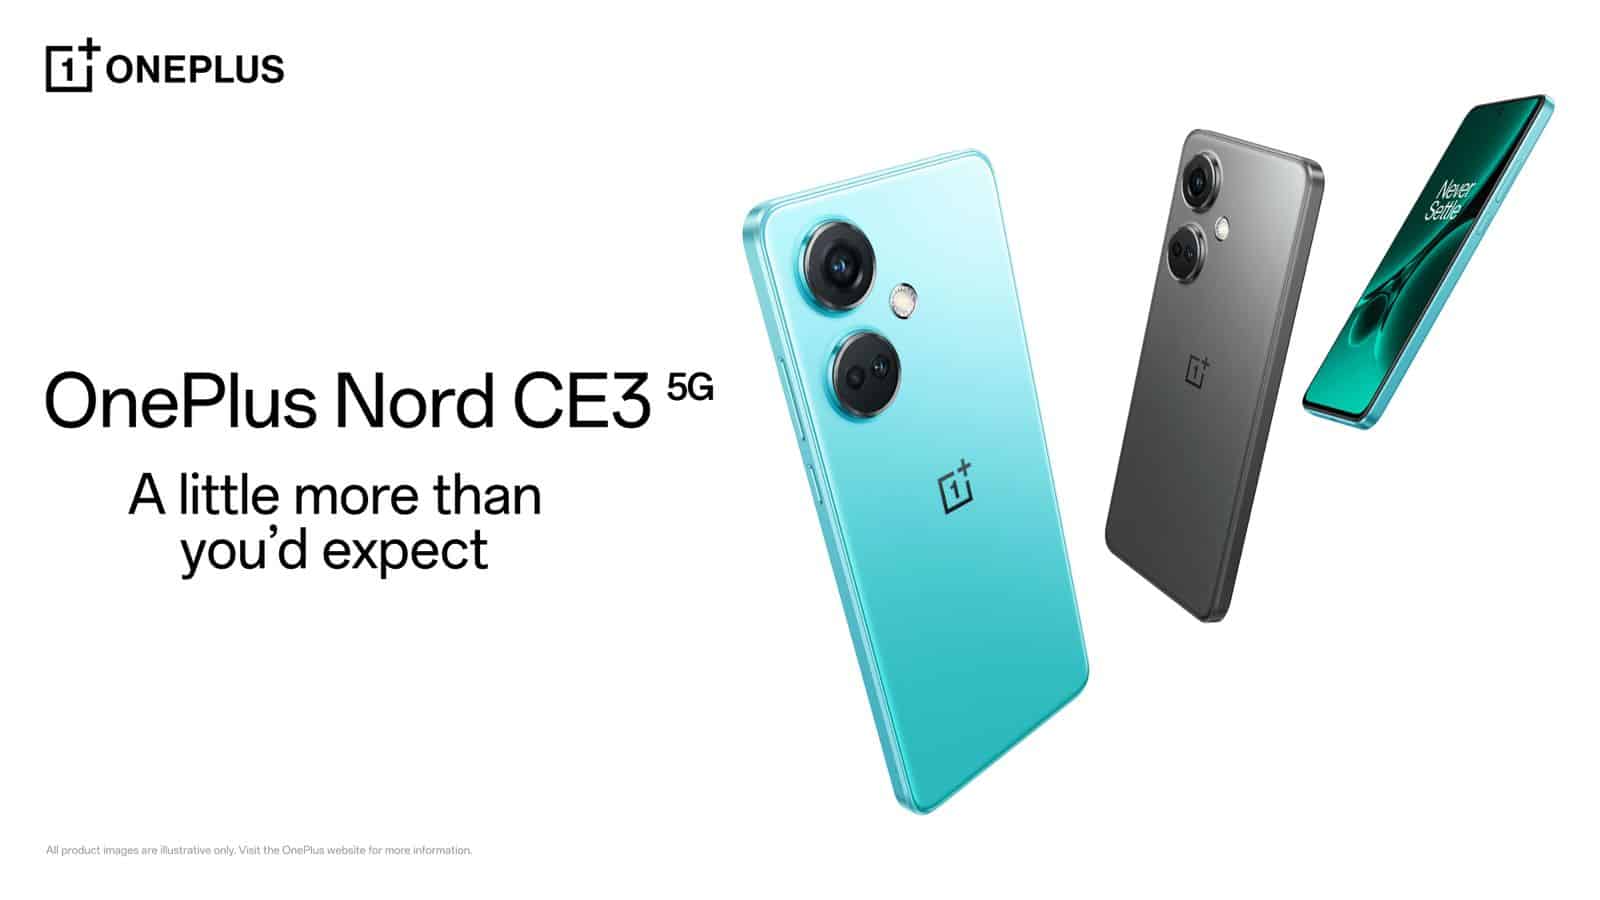 OnePlus Nord CE3 5G First Open Sale